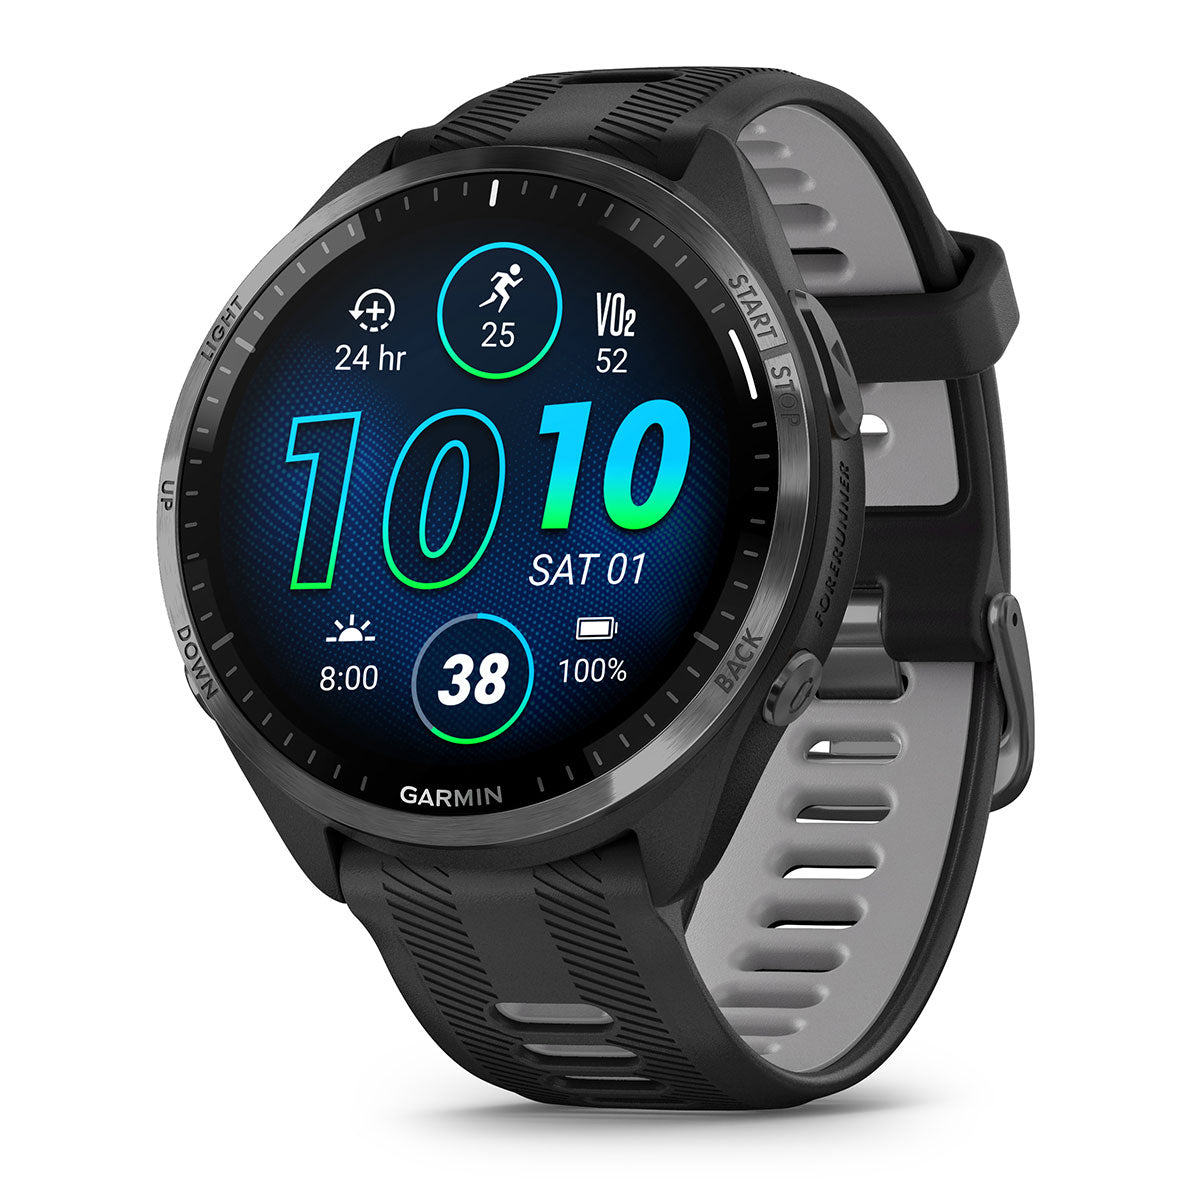 Garmin Forerunner 965 (Black/Powder Gray) Premium Running GPS Smartwatch | Gift Box with PlayBetter HD Screen Protectors, Wall Adapter & Case - image 2 of 7